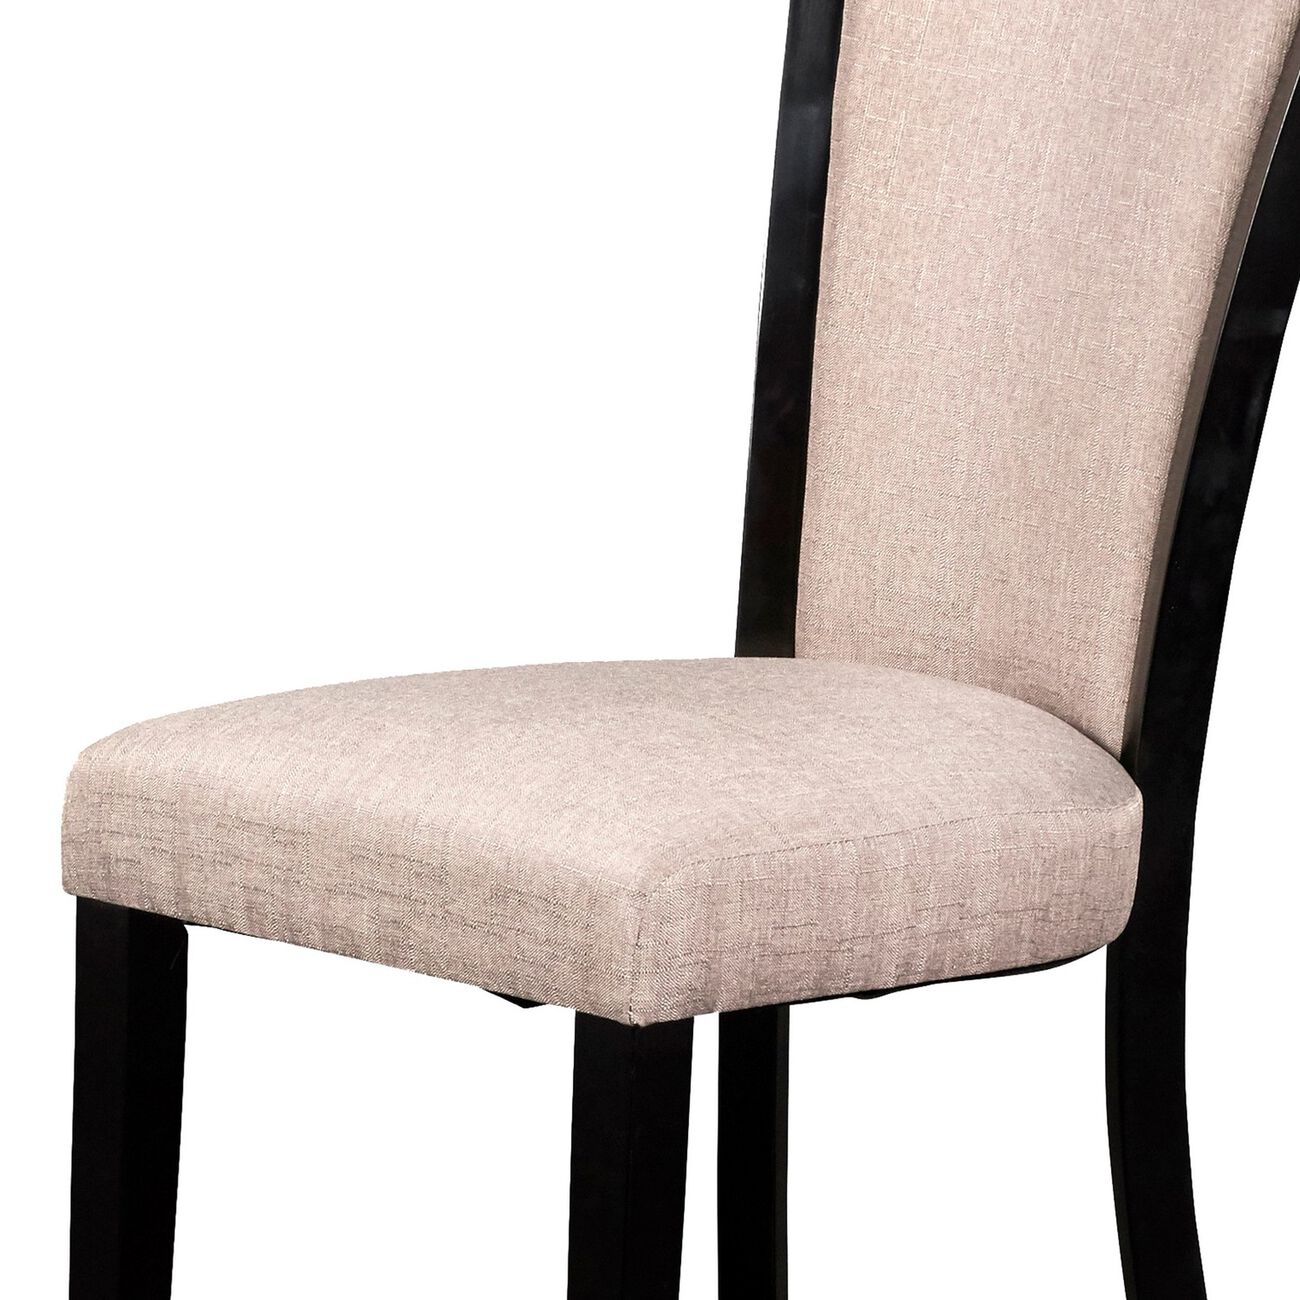 Wooden Dining Chair with Fabric Seat and Backrest, Set of 2,Black and Beige